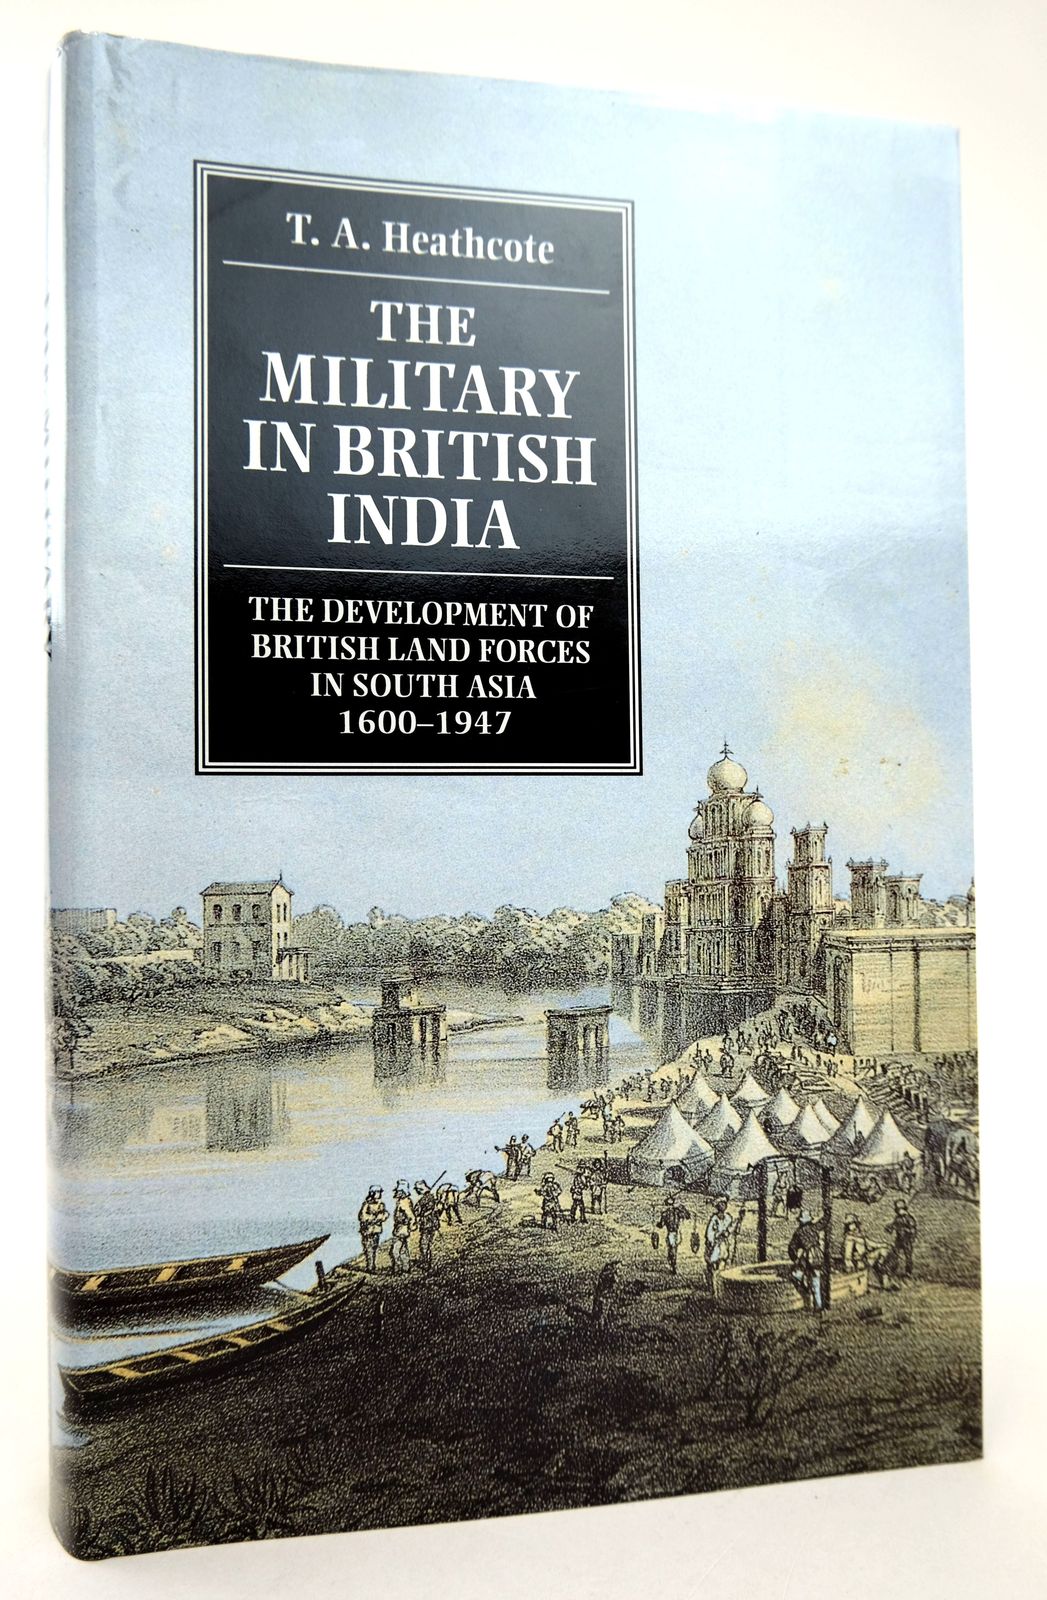 Photo of THE MILITARY IN BRITISH INDIA written by Heathcote, T.A. published by Manchester University Press (STOCK CODE: 1818766)  for sale by Stella & Rose's Books